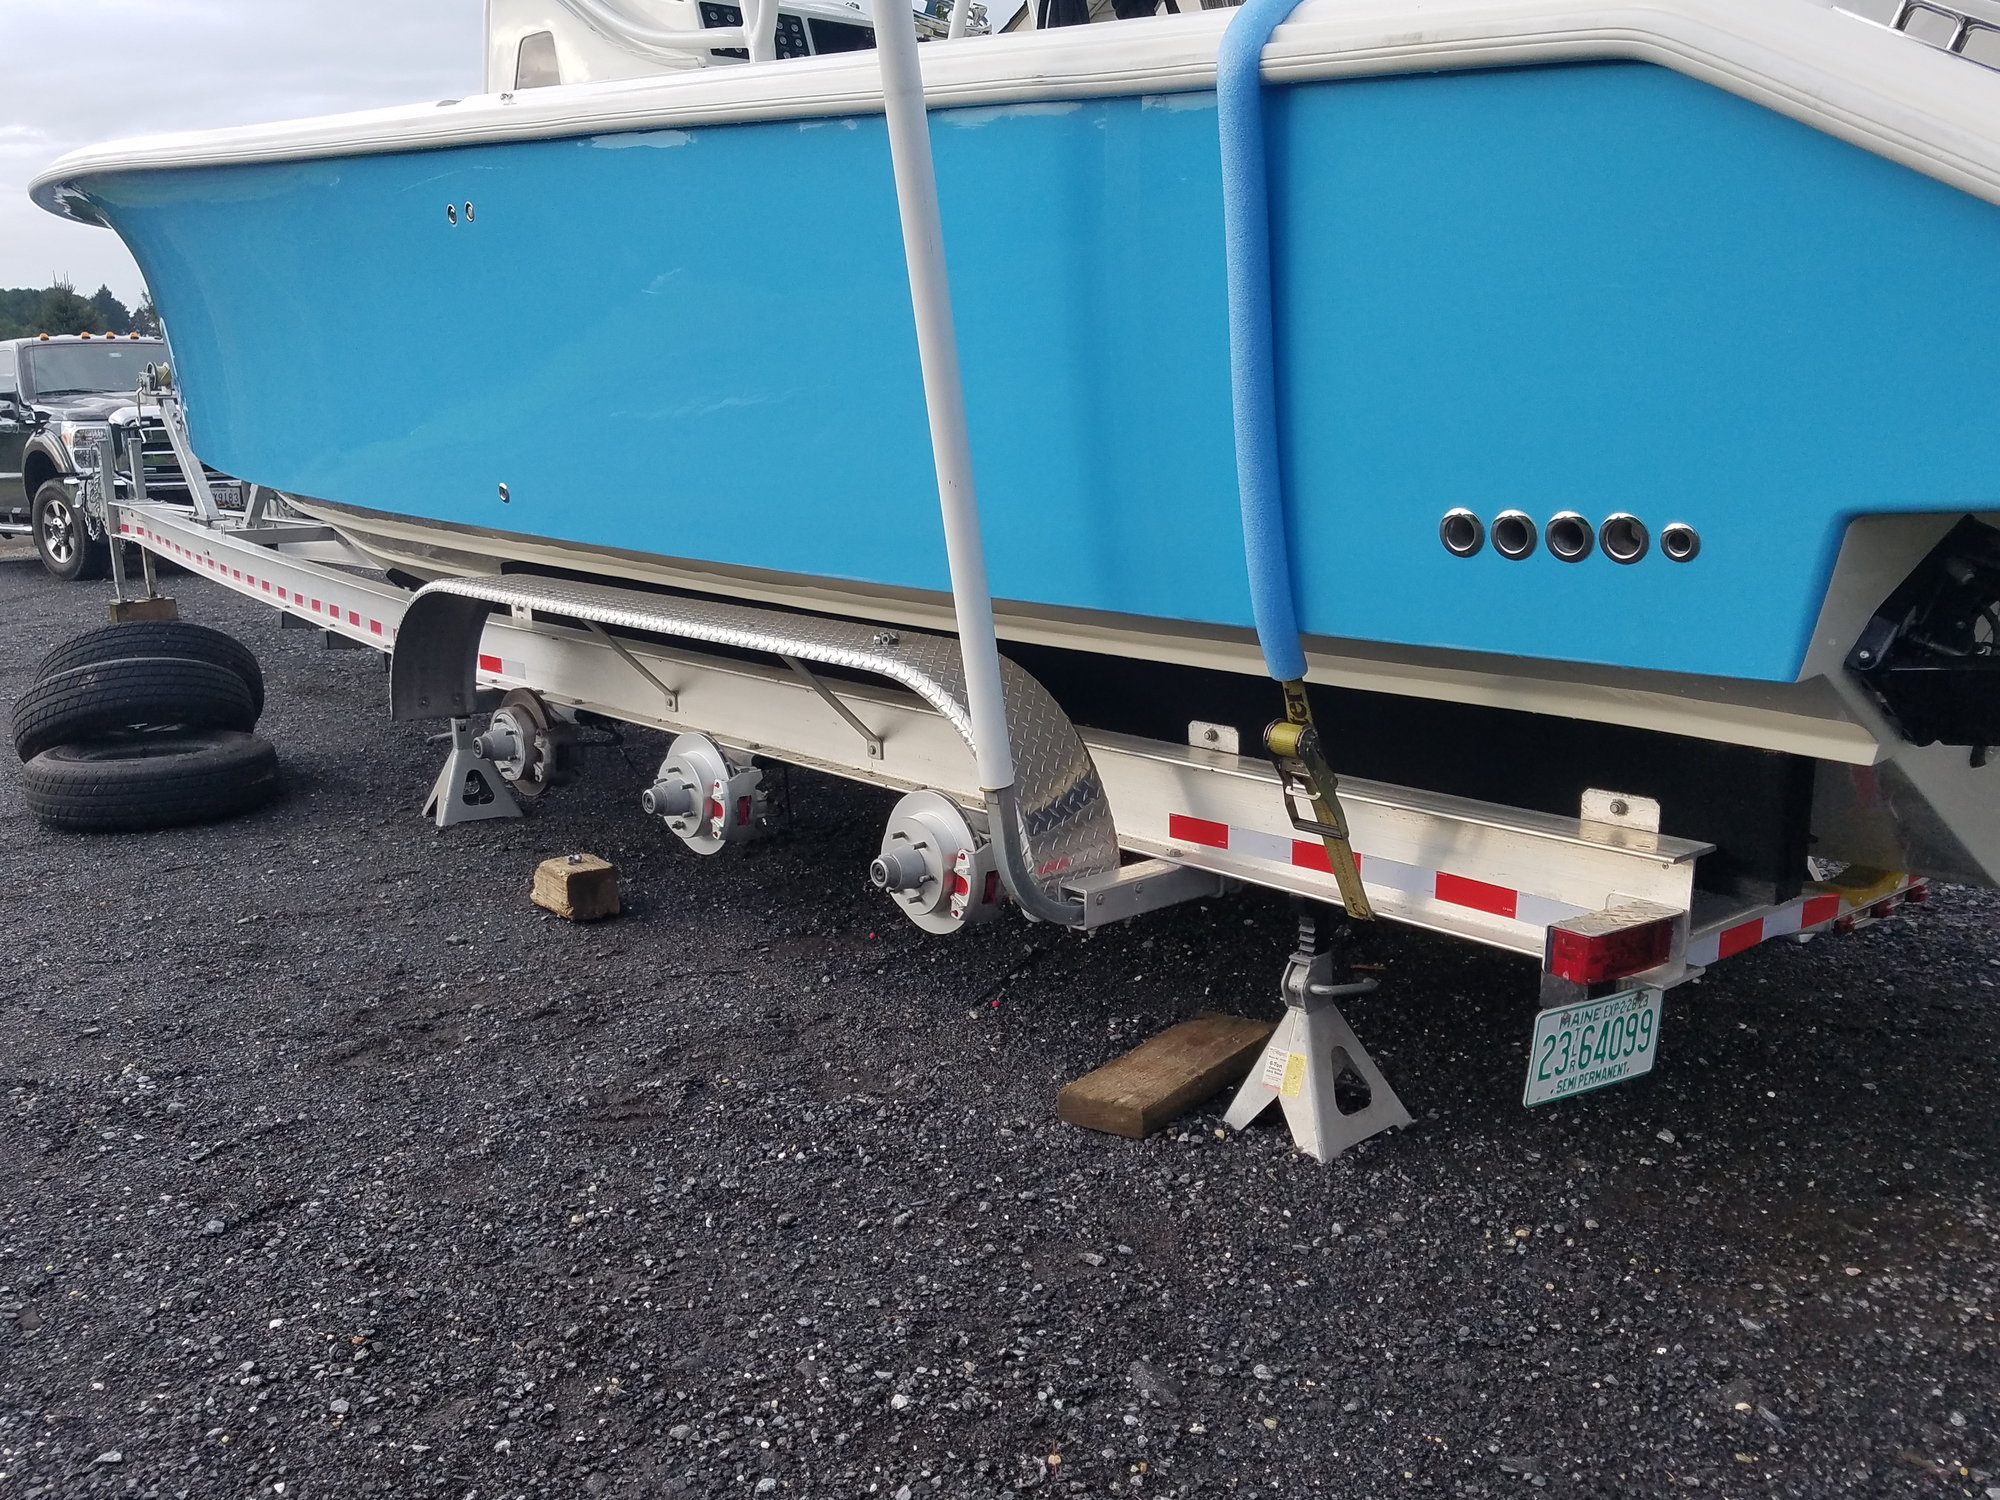 Electric brakes on a Boat Trailer? - The Hull Truth - Boating and ...